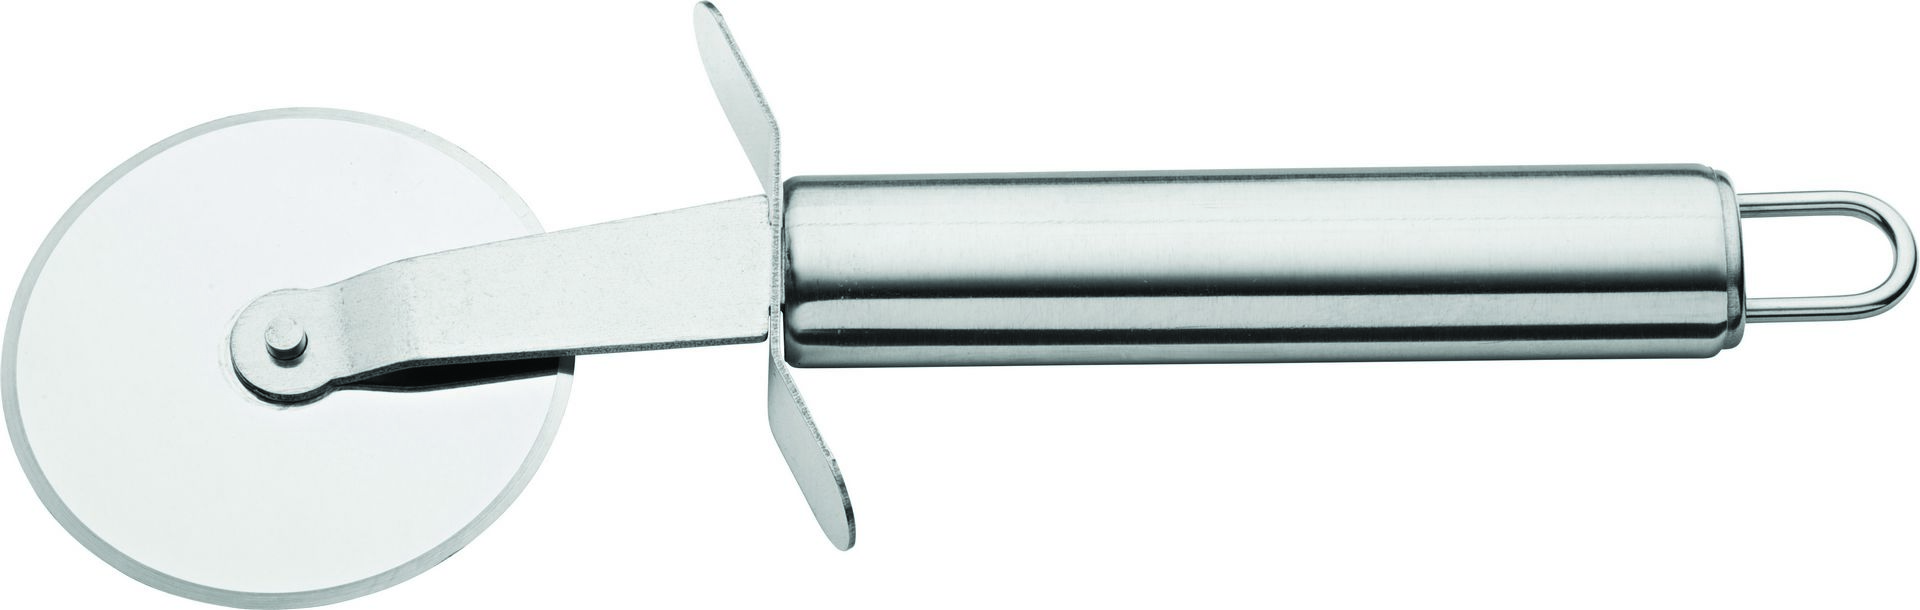 Stainless Steel Pizza Cutter - F91074-000000-B01012 (Pack of 12)